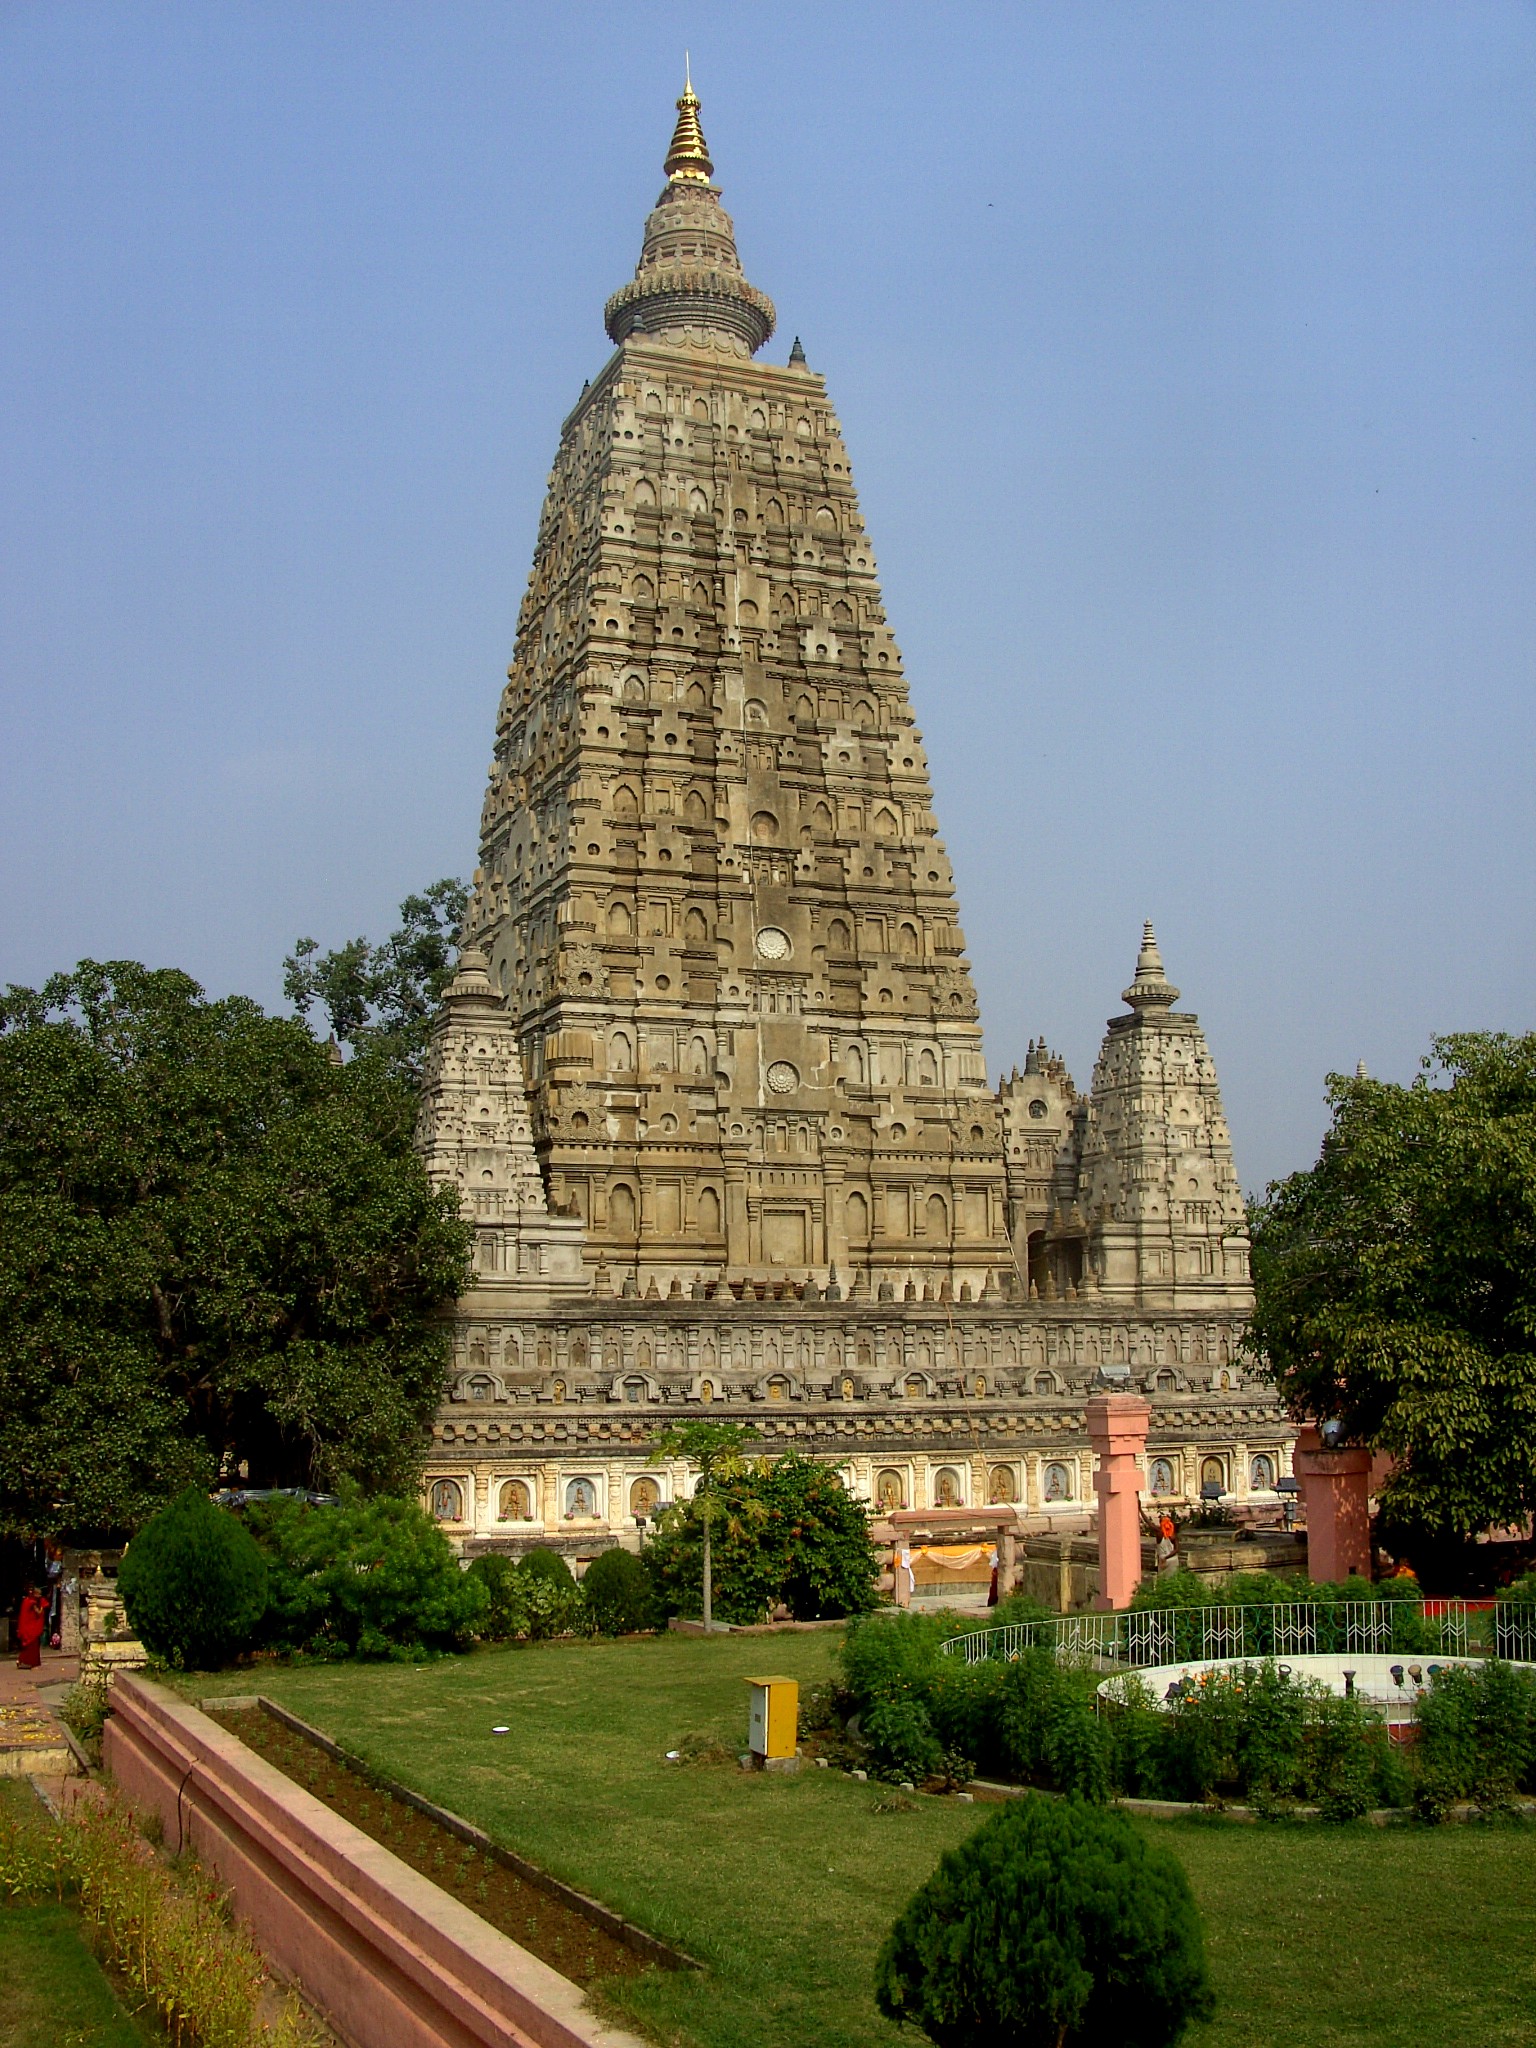 Mahabodhi Temple Bodh Gaya Historical Facts And Pictures The